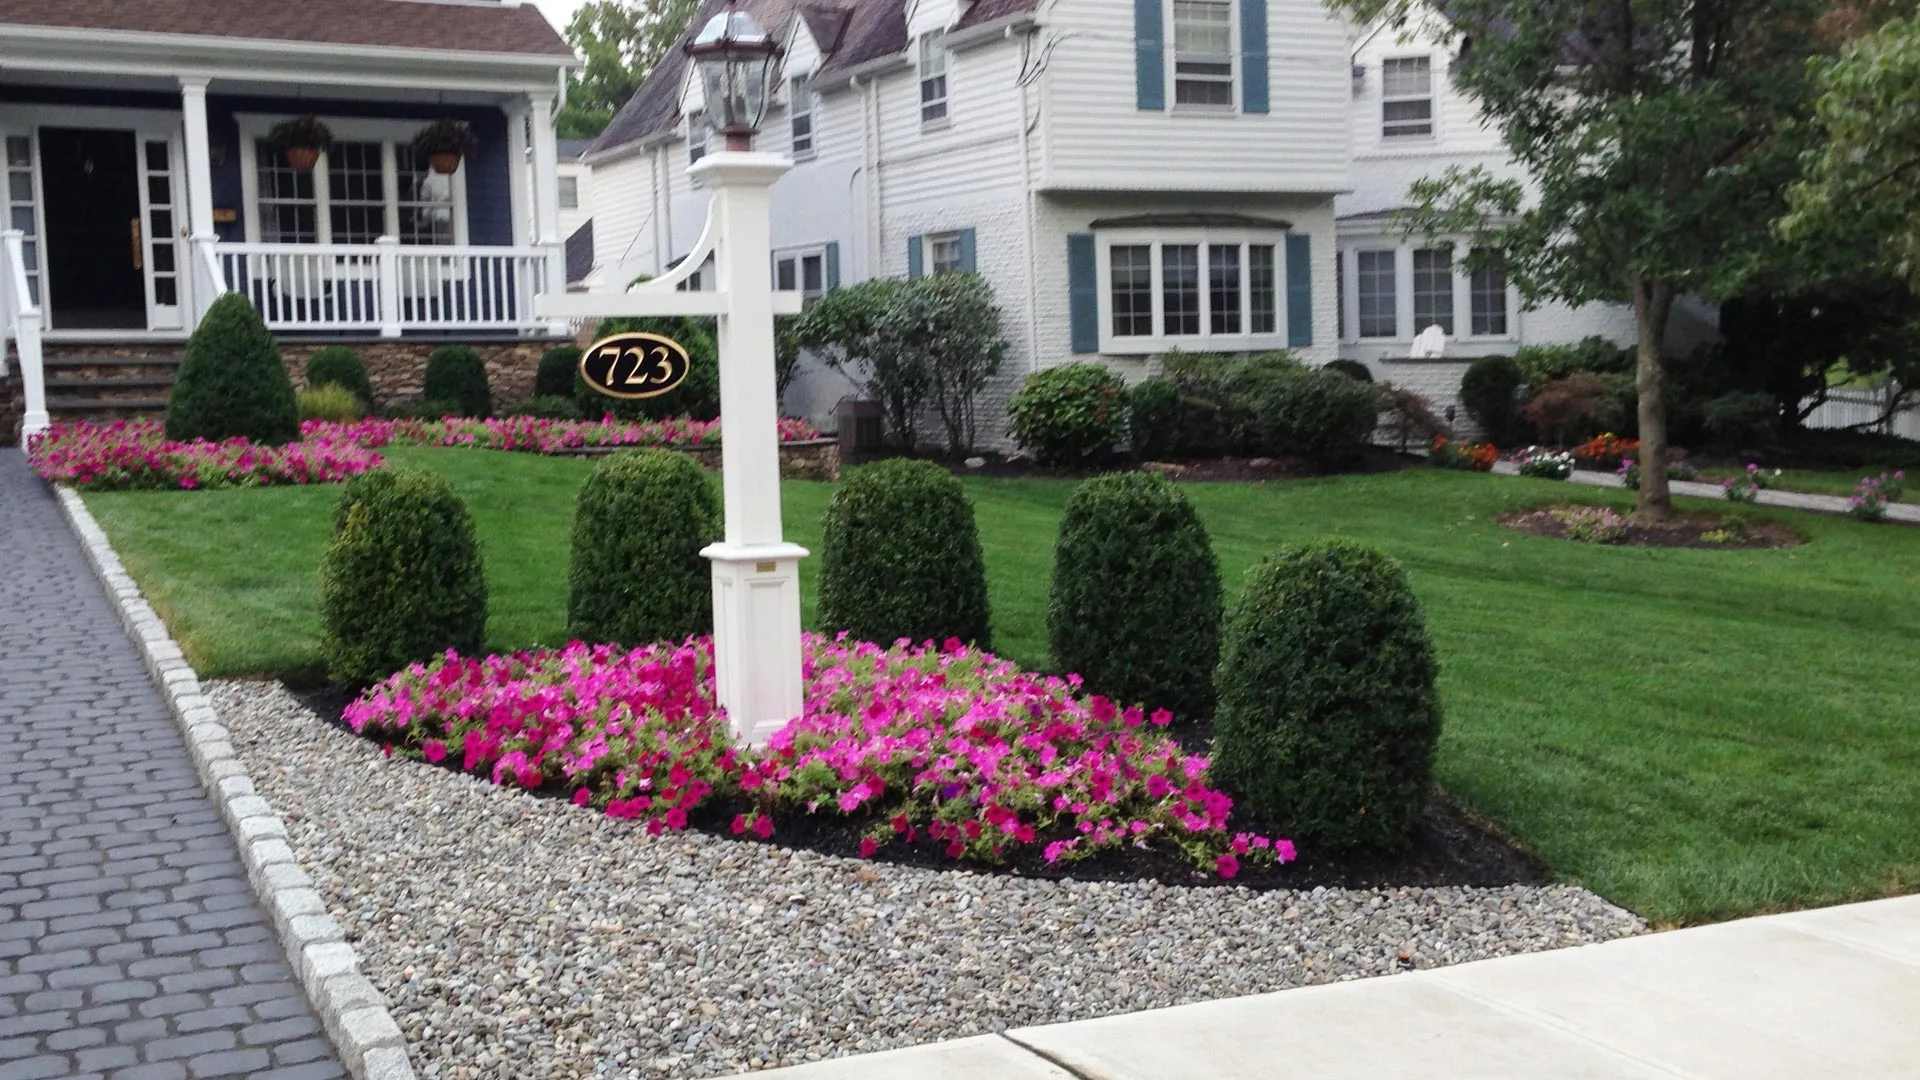 After new landscaping and lawn care at home in Warren, NJ.